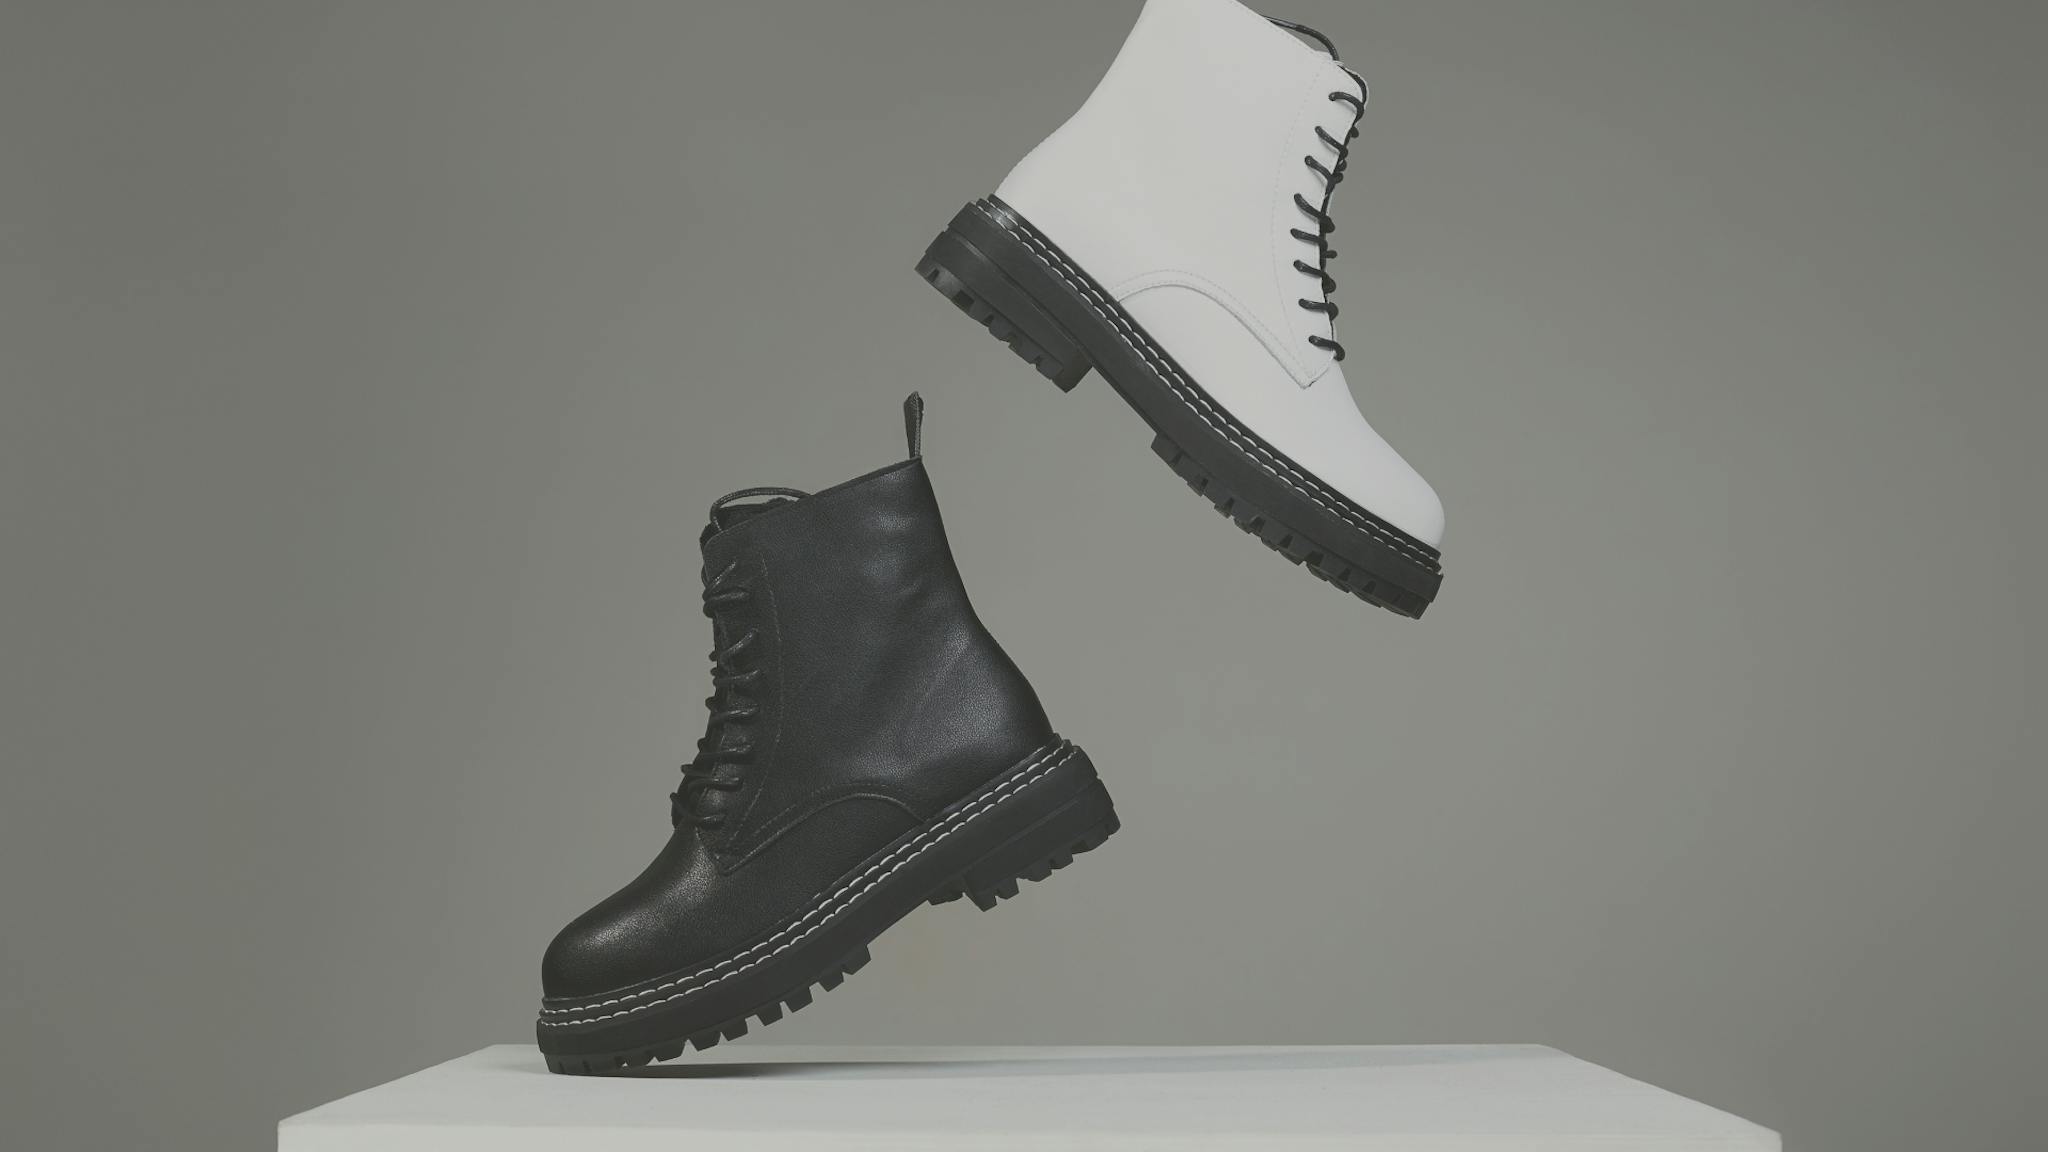 Shoes online at FOOTWAY.com - 30,000 shoes from 650 brands | Footway